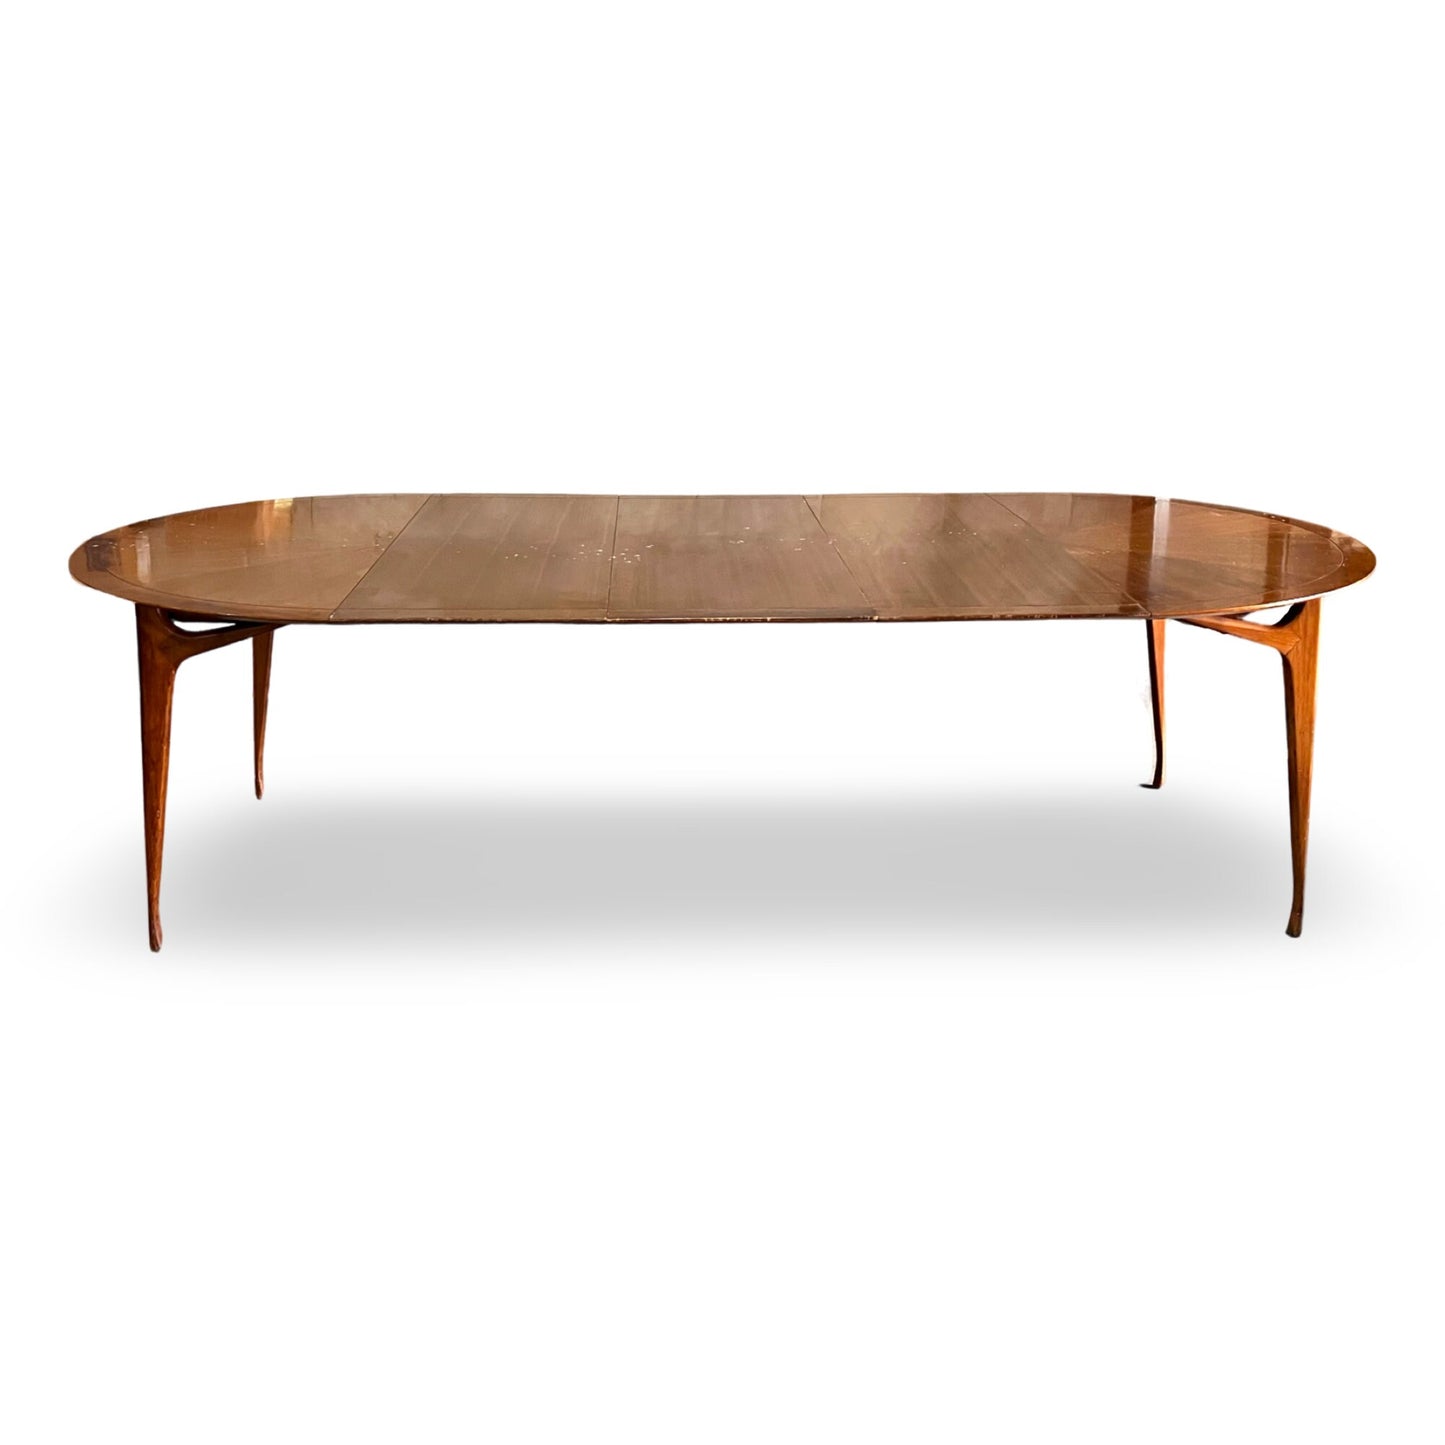 Sleek MCM dining table with sculpted legs, ideal for gatherings of 10+.